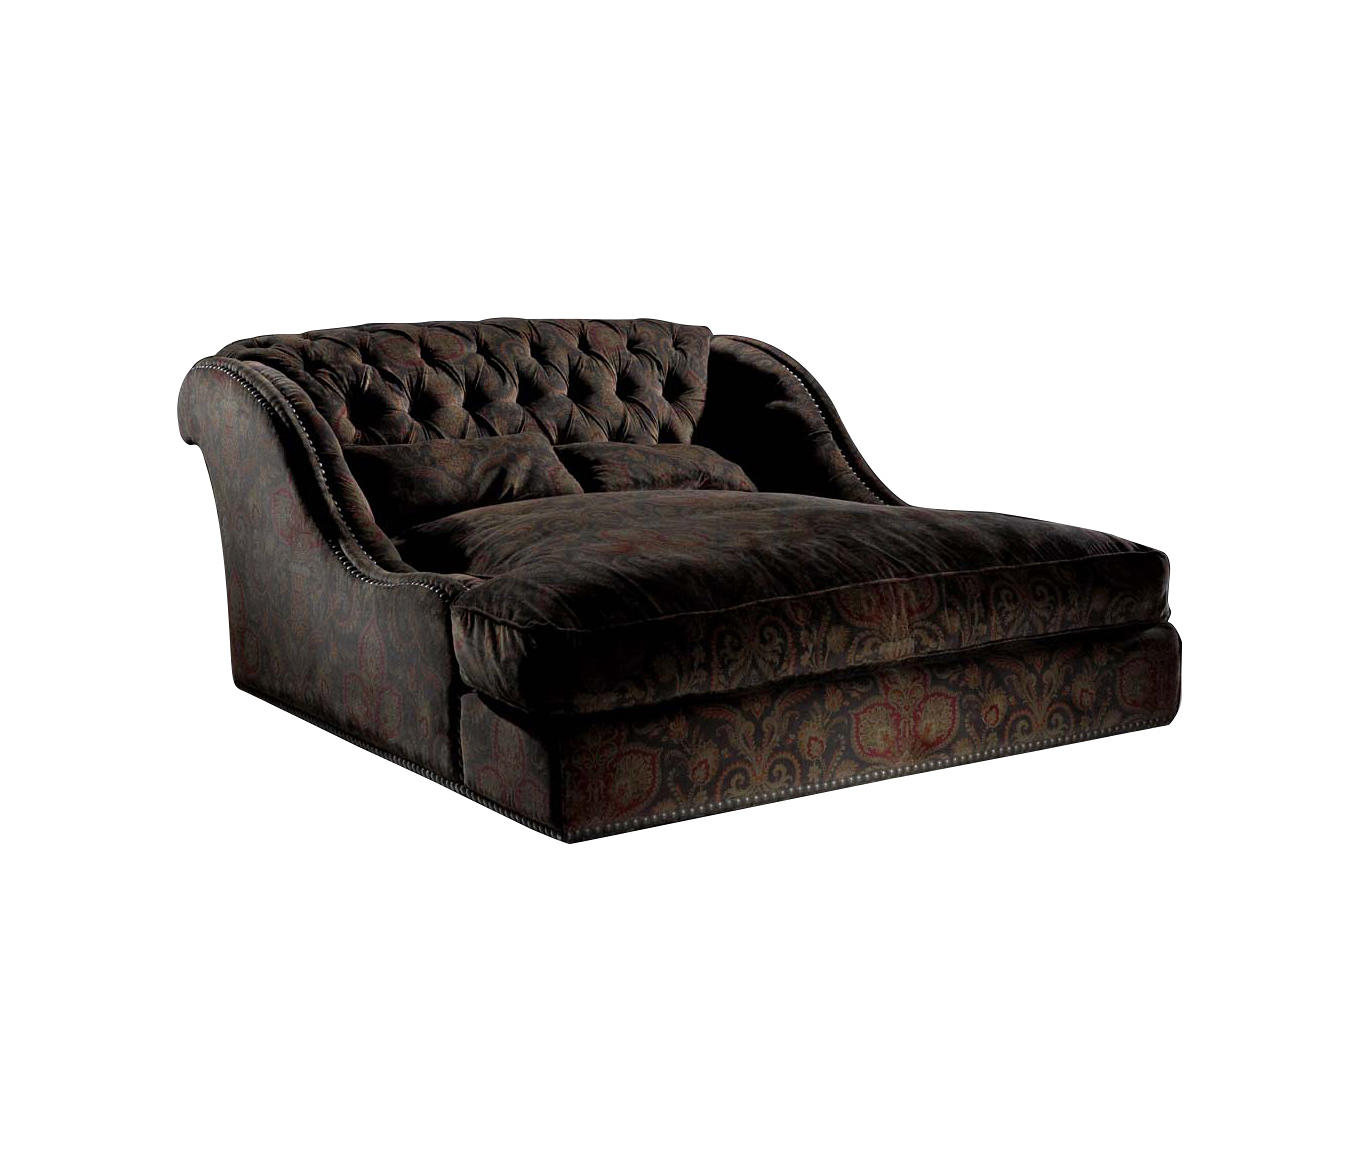 Diva Double Chaise Longue Architonic, Double Leather Chaise